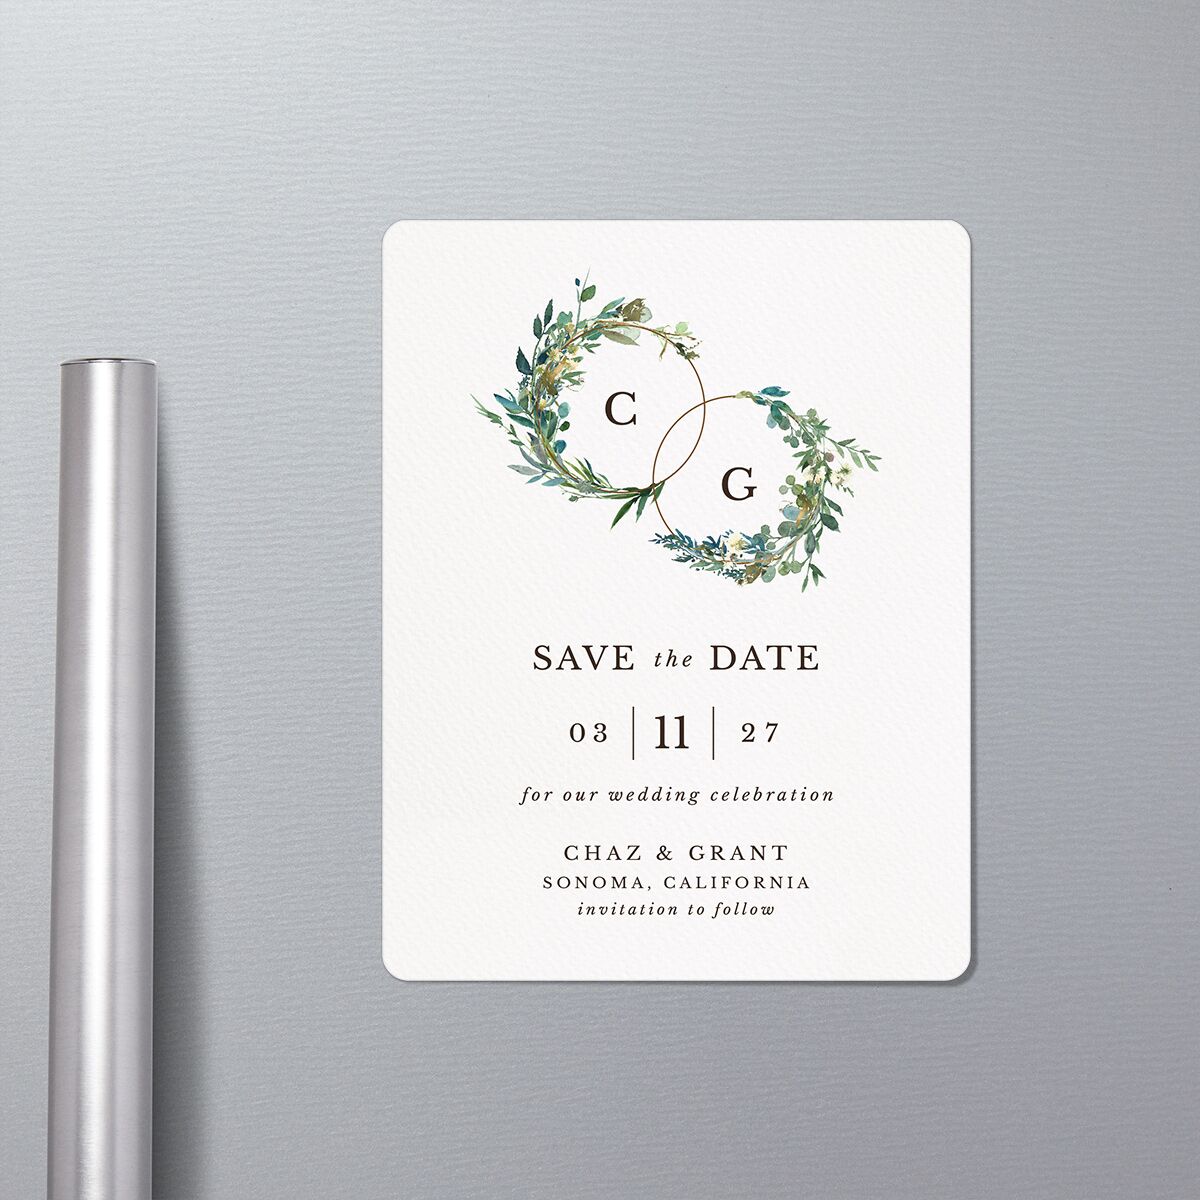 Leafy Hoops Save The Date Magnets in-situ in Green